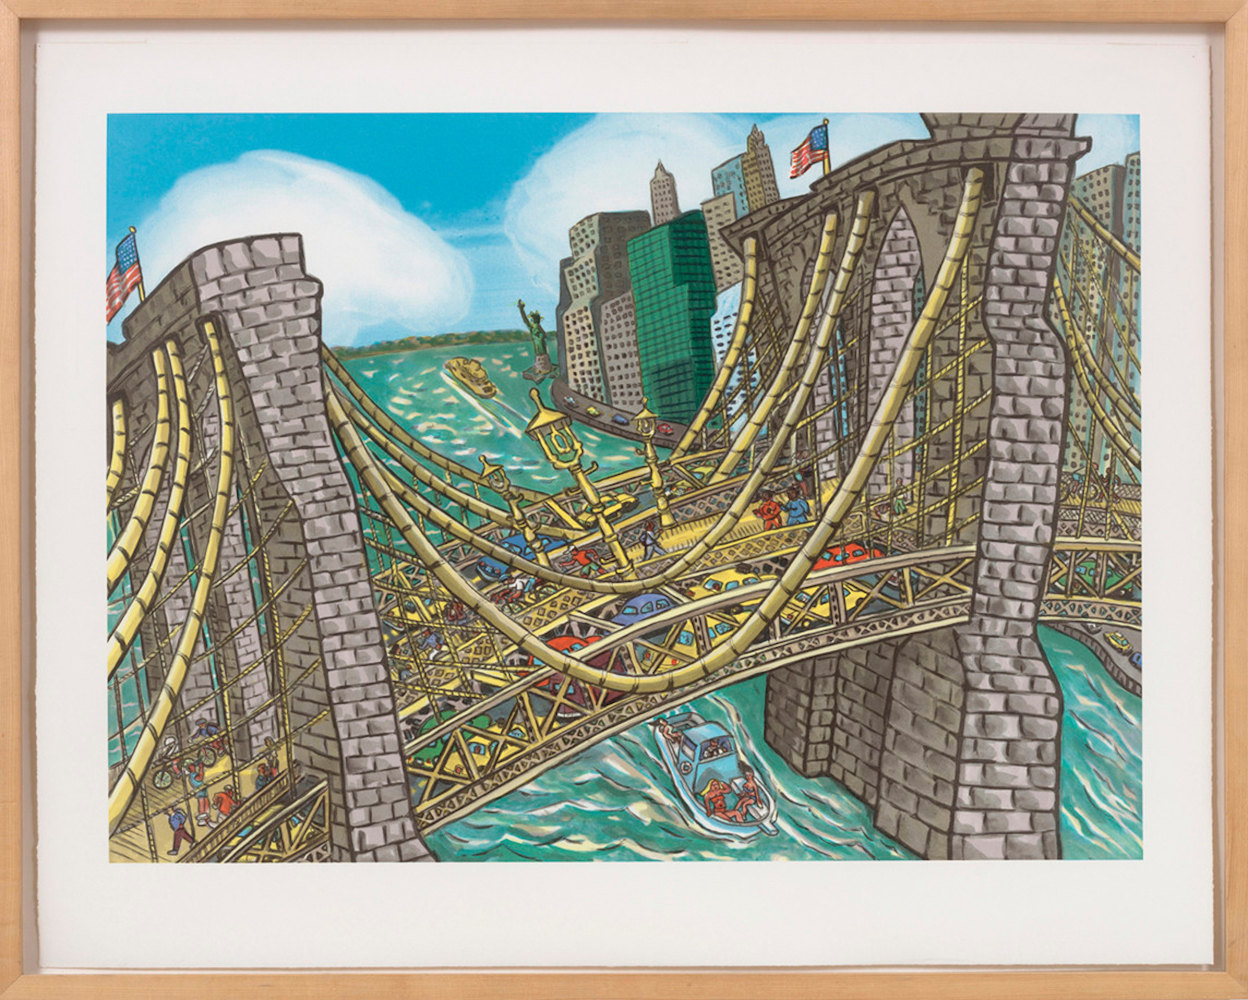 Brooklyn Bridge Bustle, 2002

color lithograph, edition of 75 + 5 HC to 10 AP (85)

26 3/4 x 34 in. / 68 x 86.4 cm